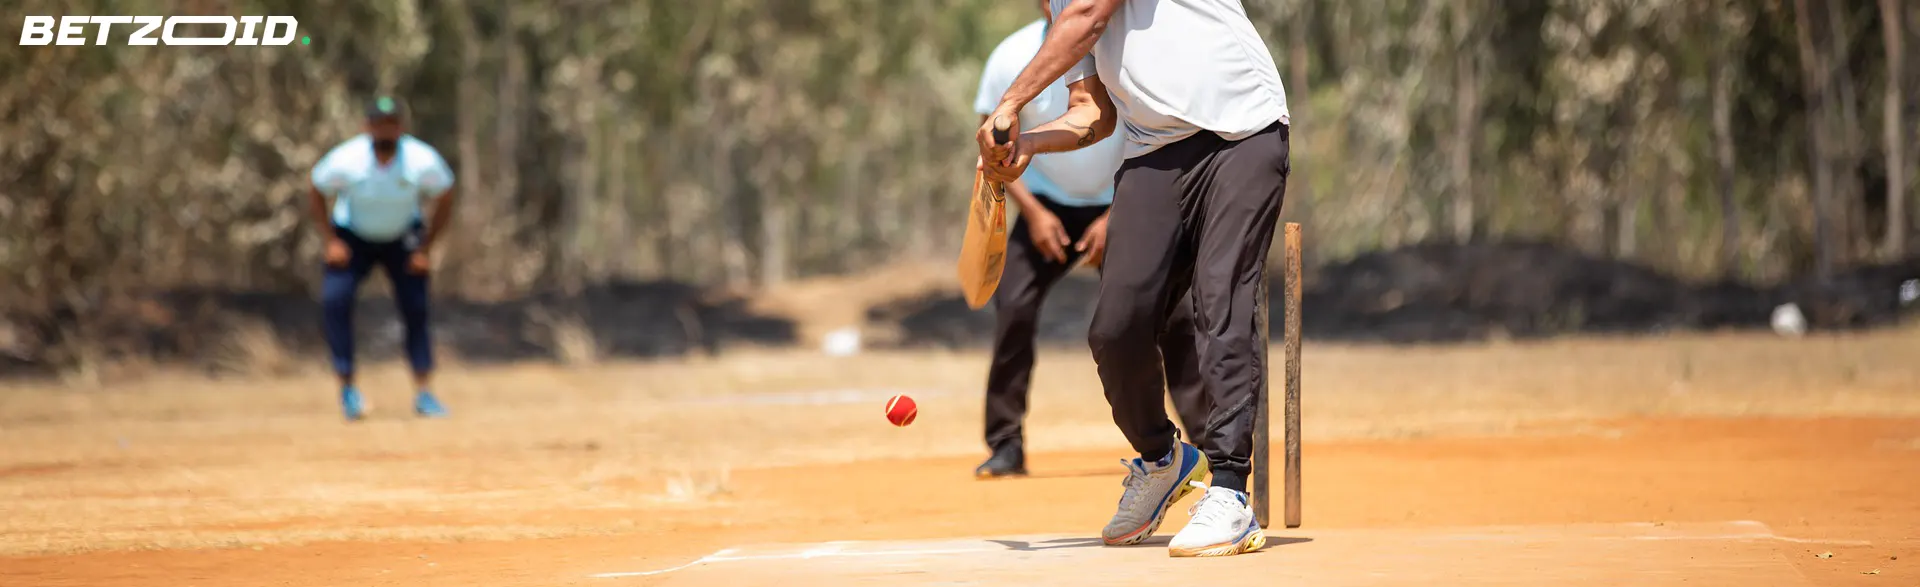 A cricket match in action with the bowler releasing the ball, highlighting cash-out options at Canadian bookies.